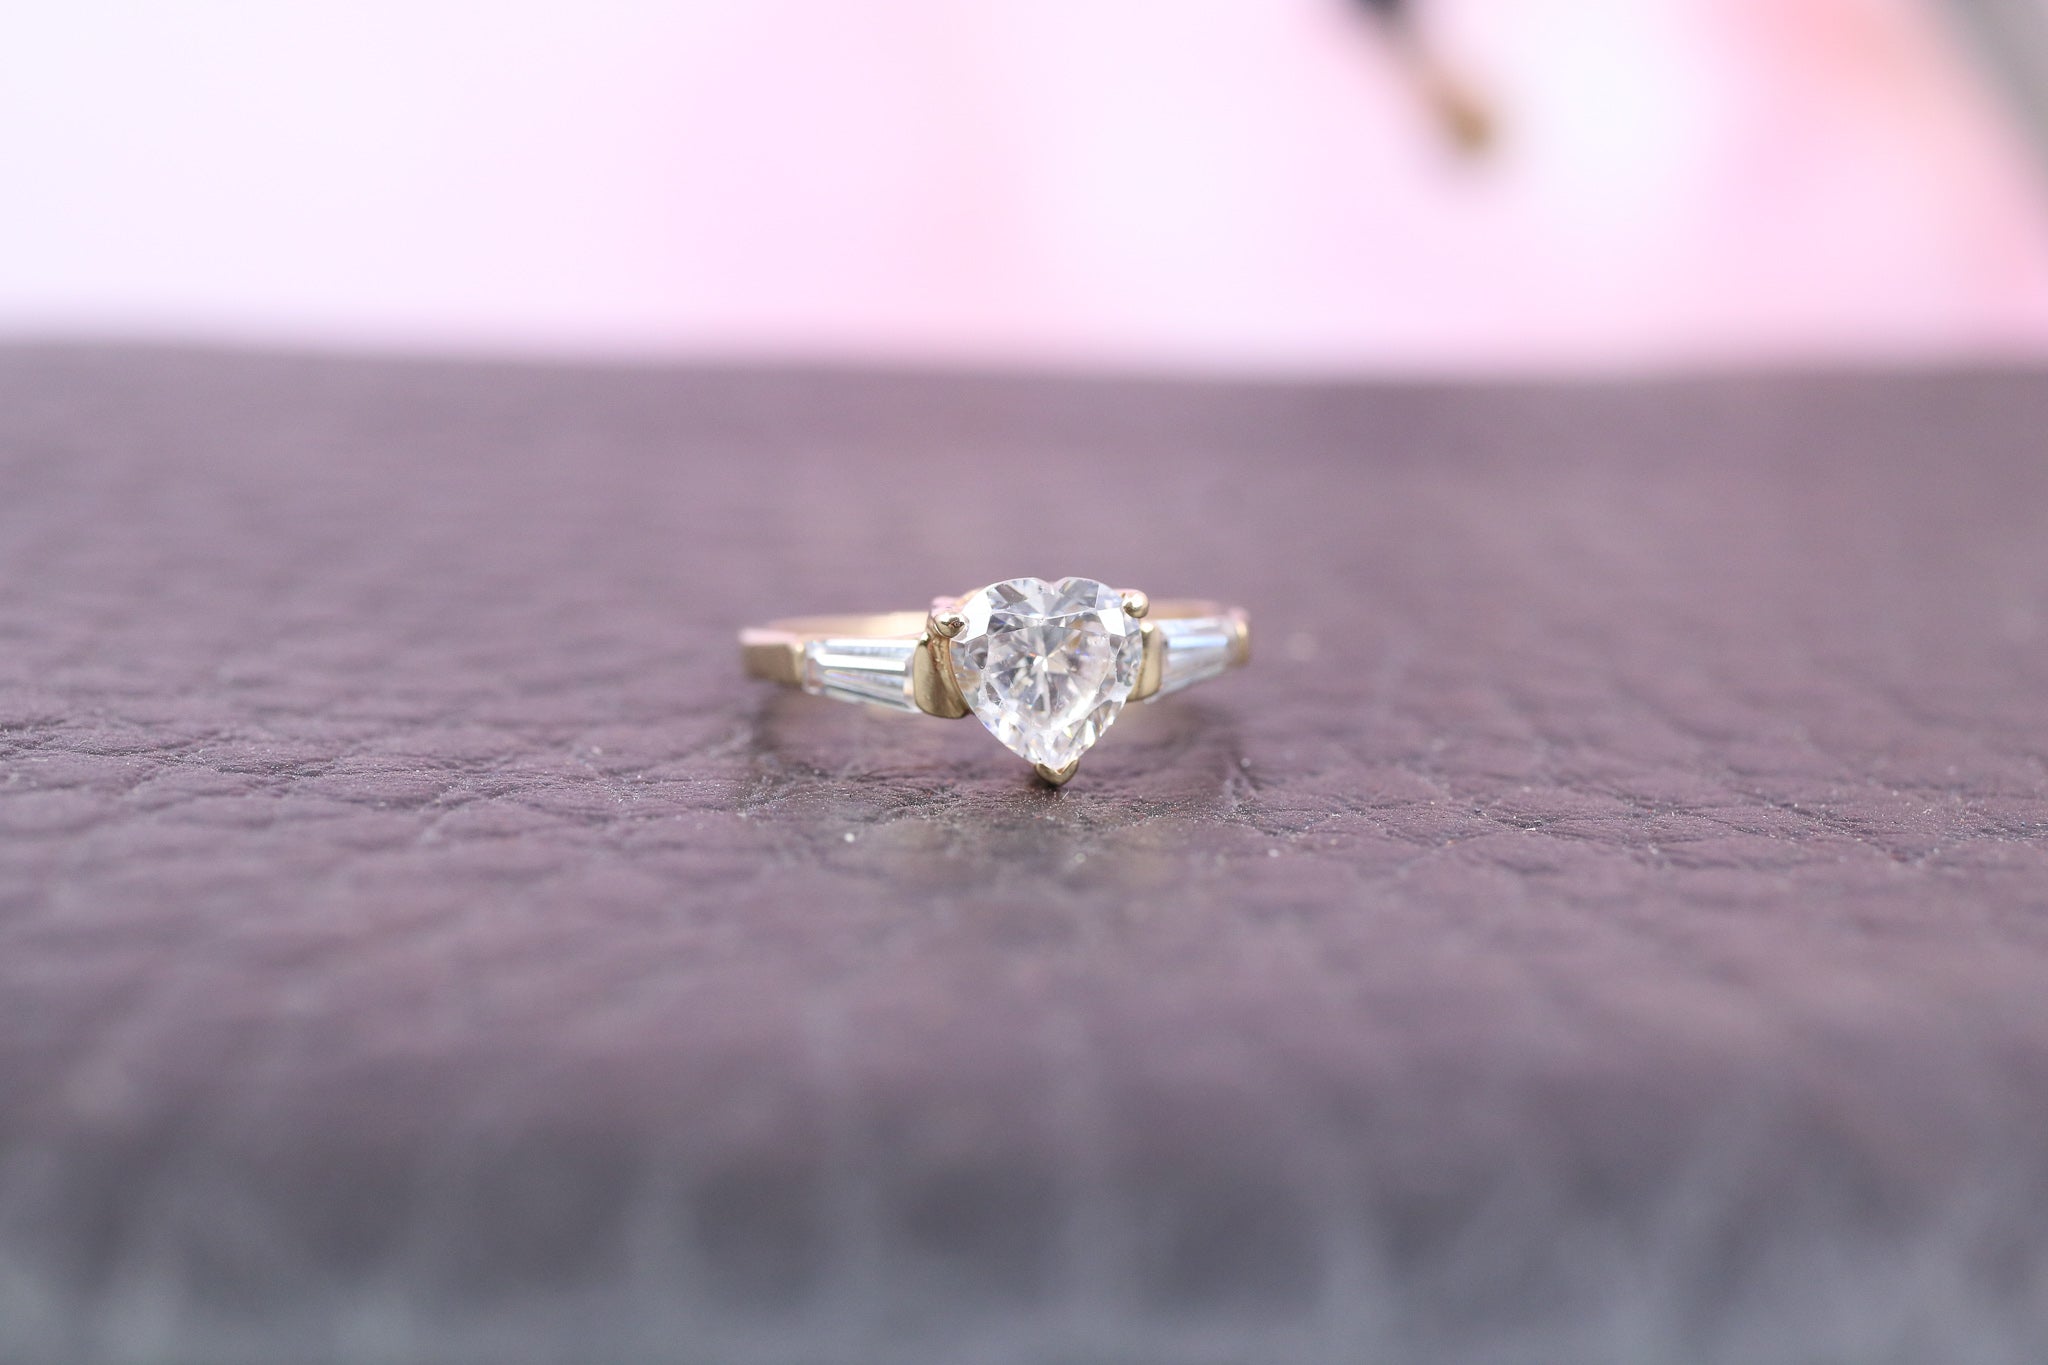 14ct Yellow Gold & CZ Ring - HJ2567 - Hallmark Jewellers Formby & The Jewellers Bench Widnes